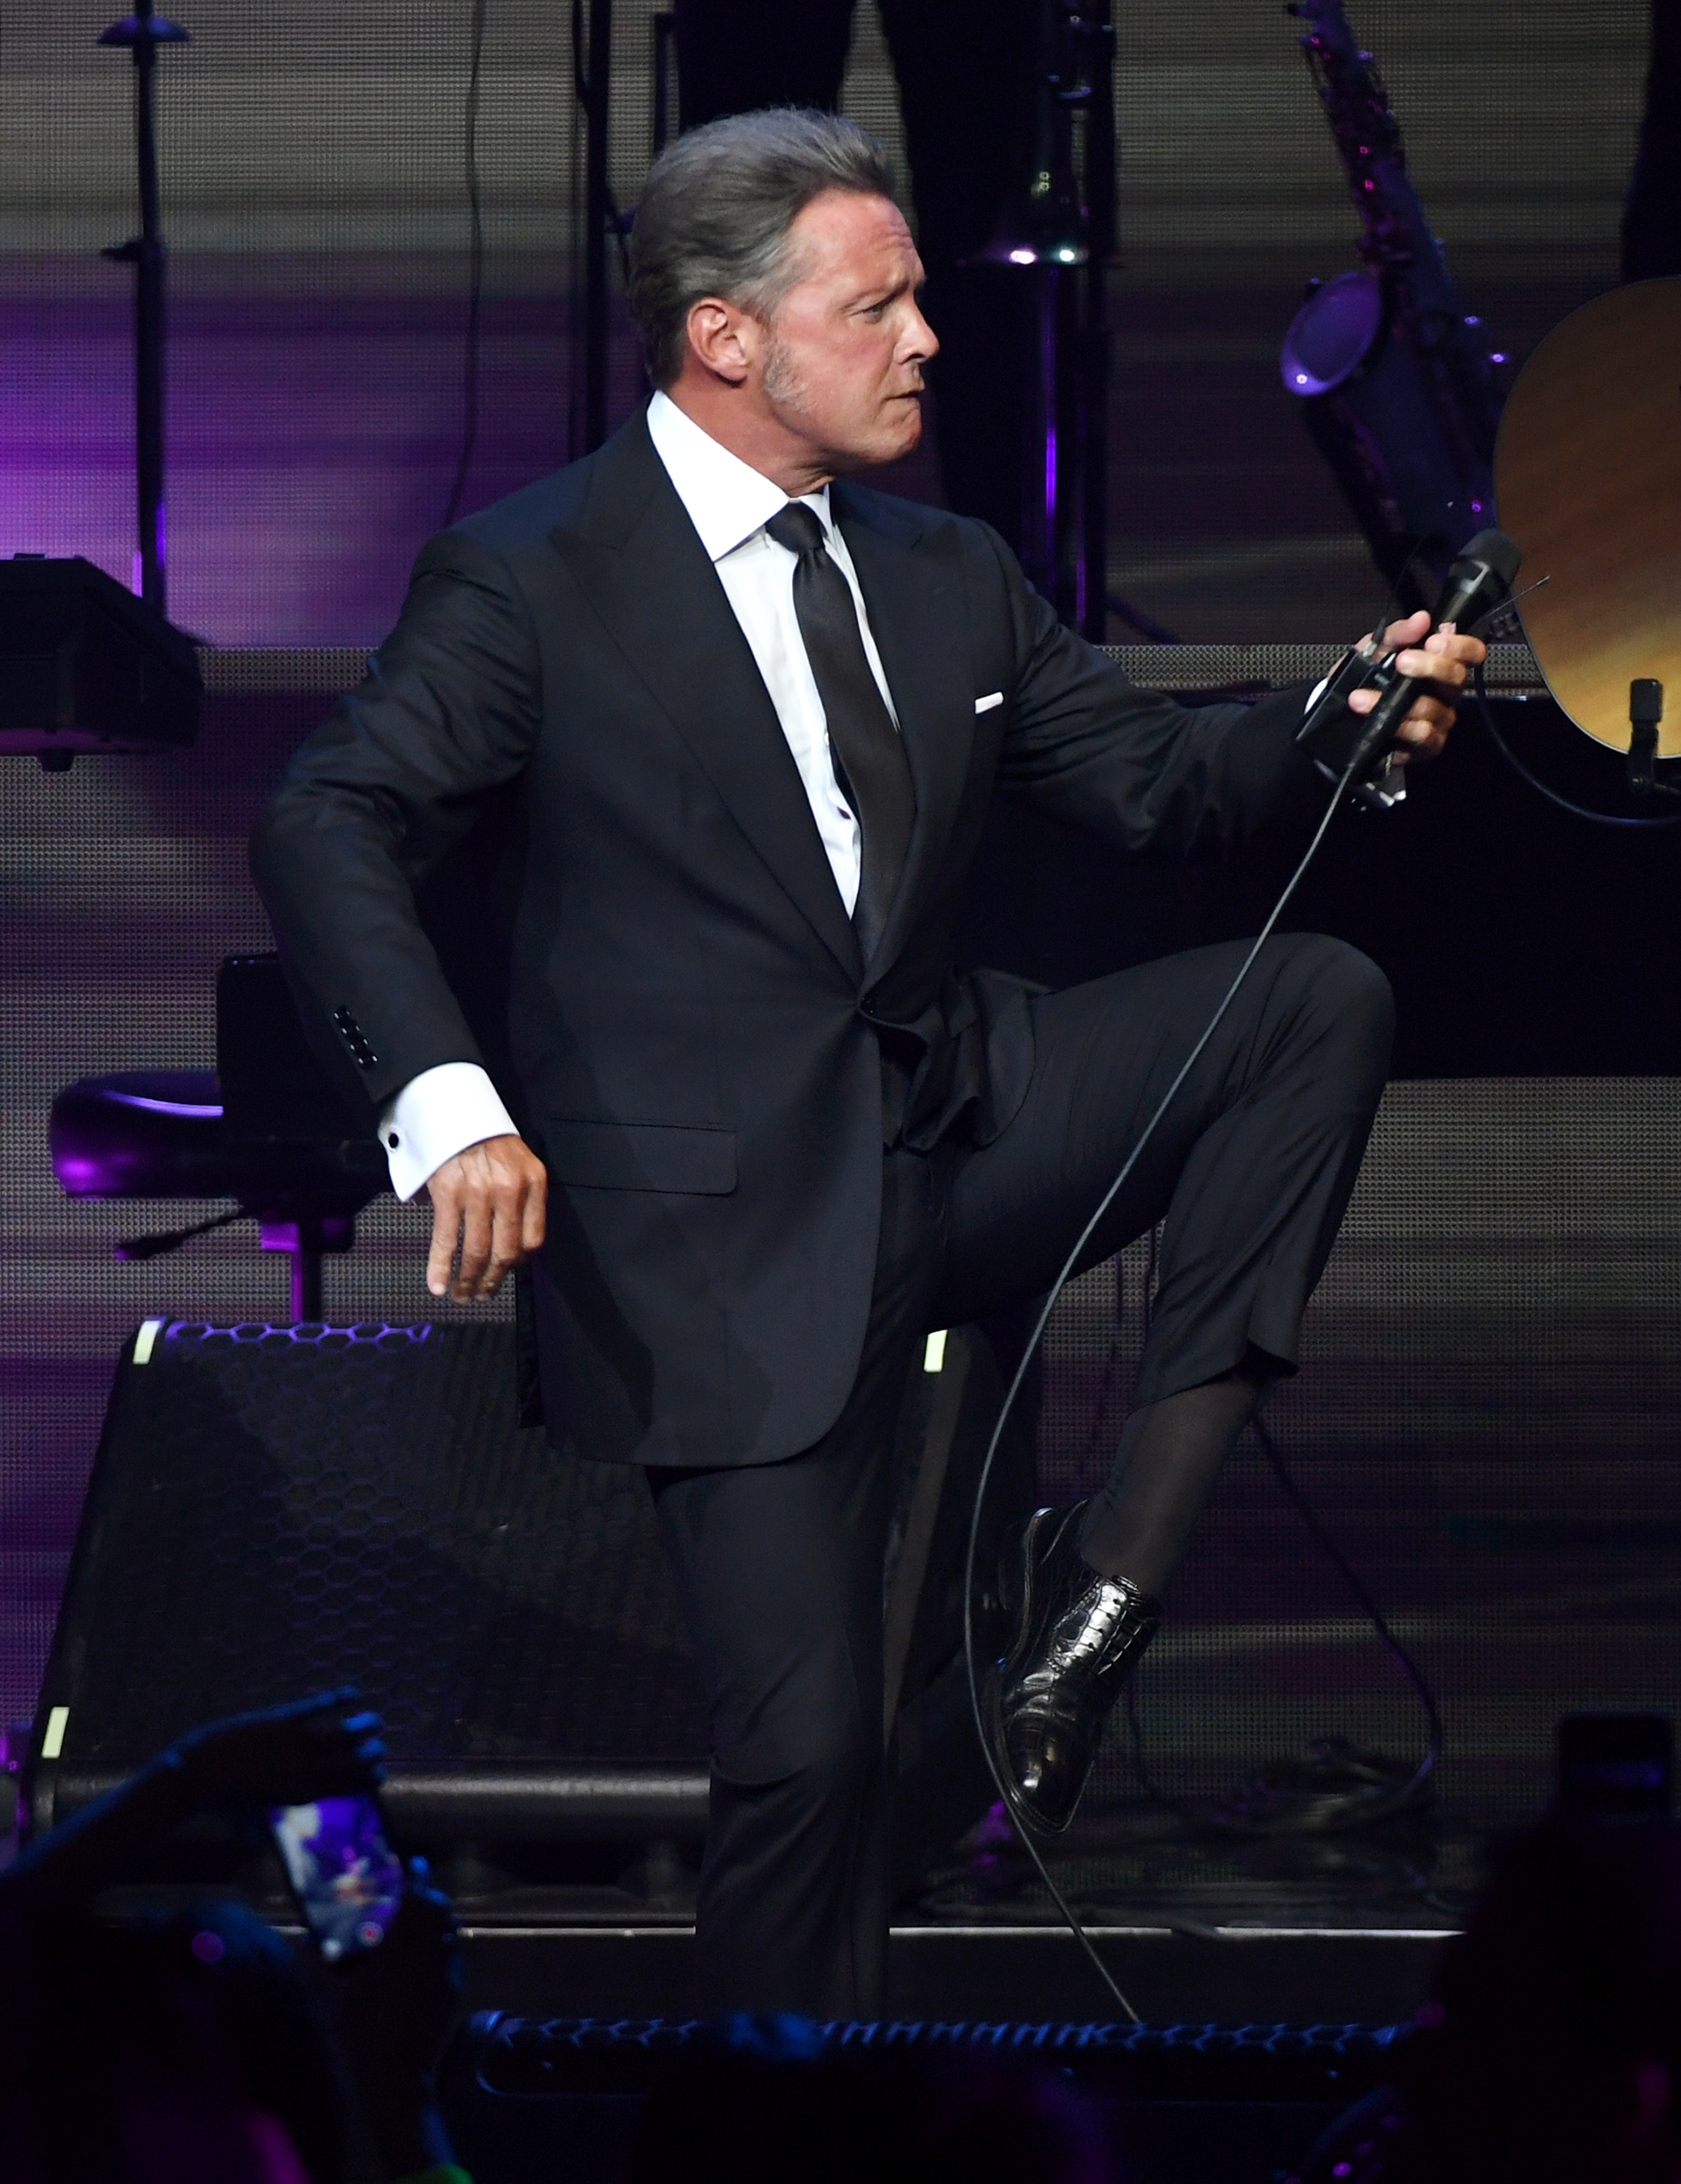 Luis Miguel possibly starts his tour in Argentina, according to the Ventaneando program;  later he would visit Mexico (Getty Images)